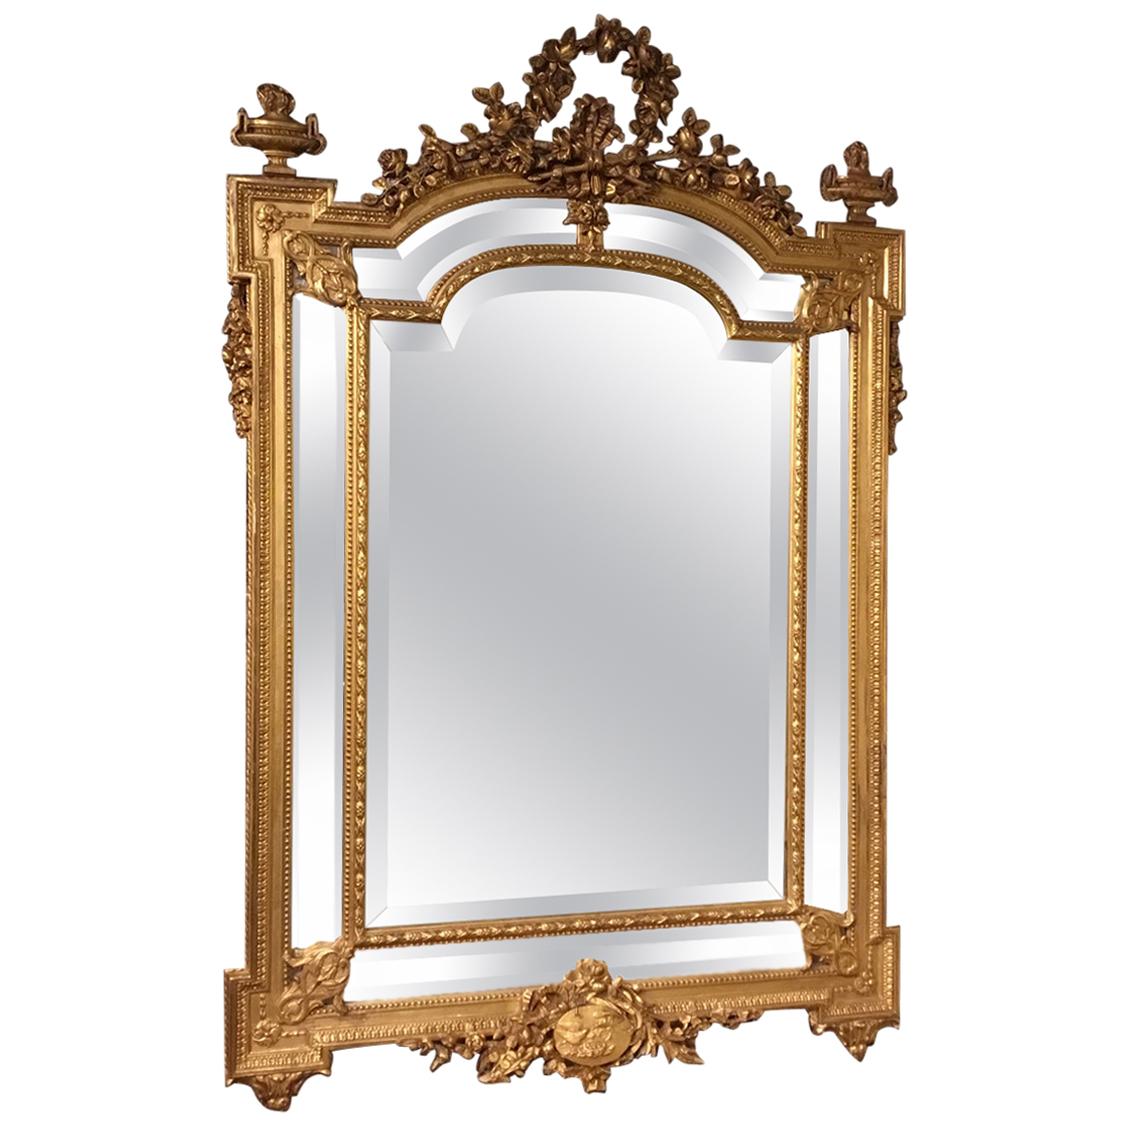 Late 19th Century French Carved Gilt-Wood Margin Mirror